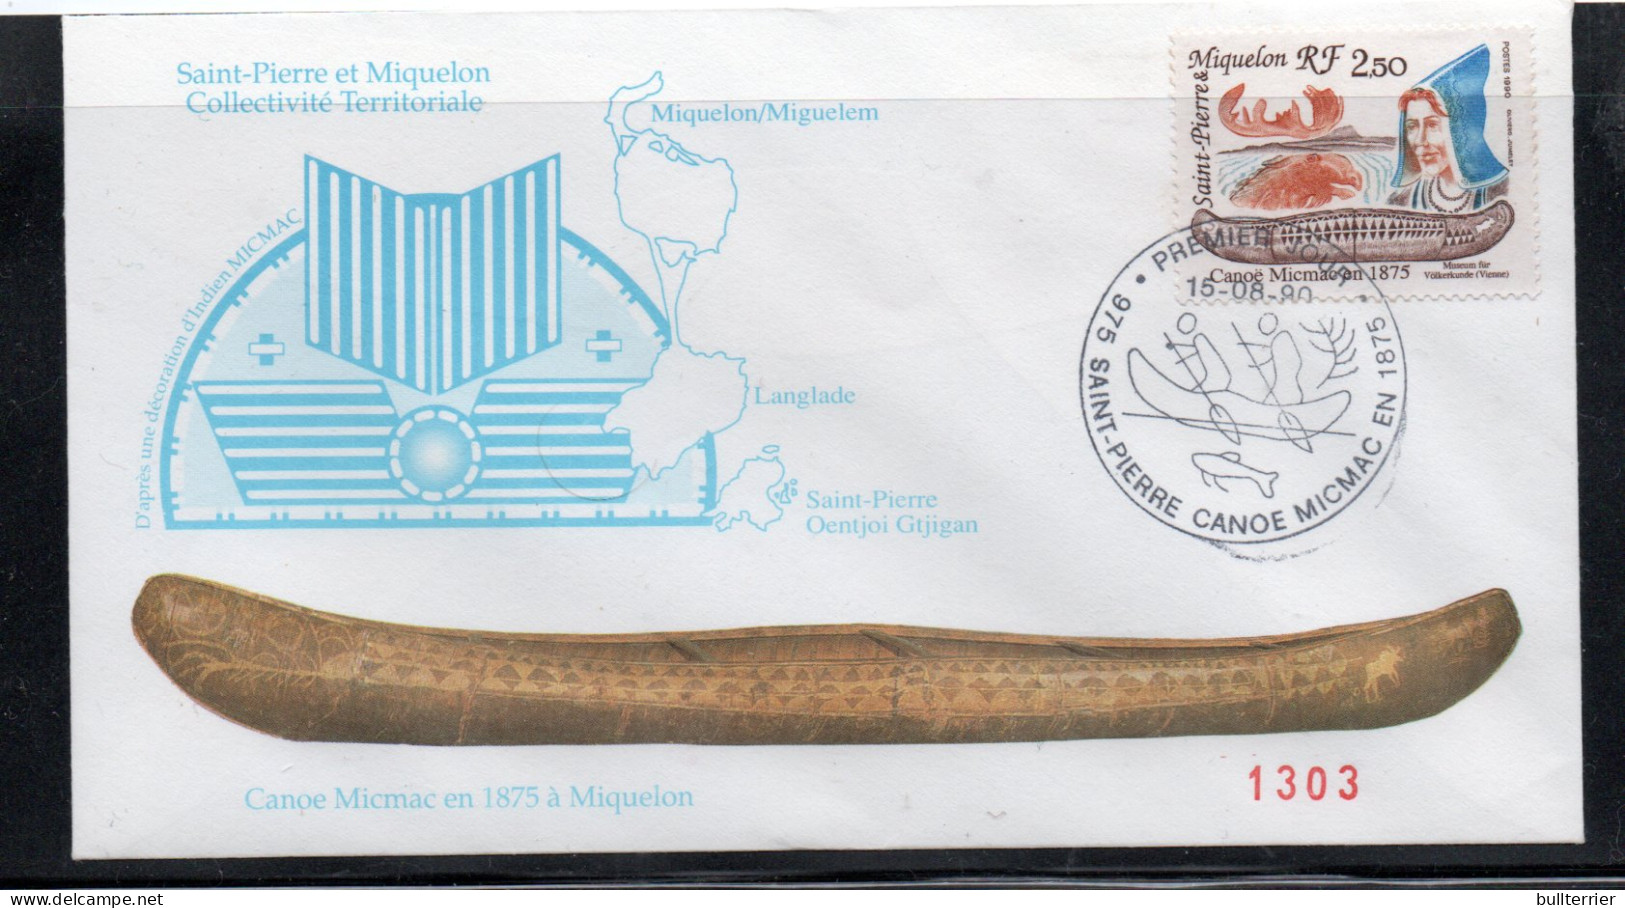 CANOES - ST PIERRE MIQUELON - 1980 - MICMAC CANOE ON ILLUSTRATED FDC - Kanu